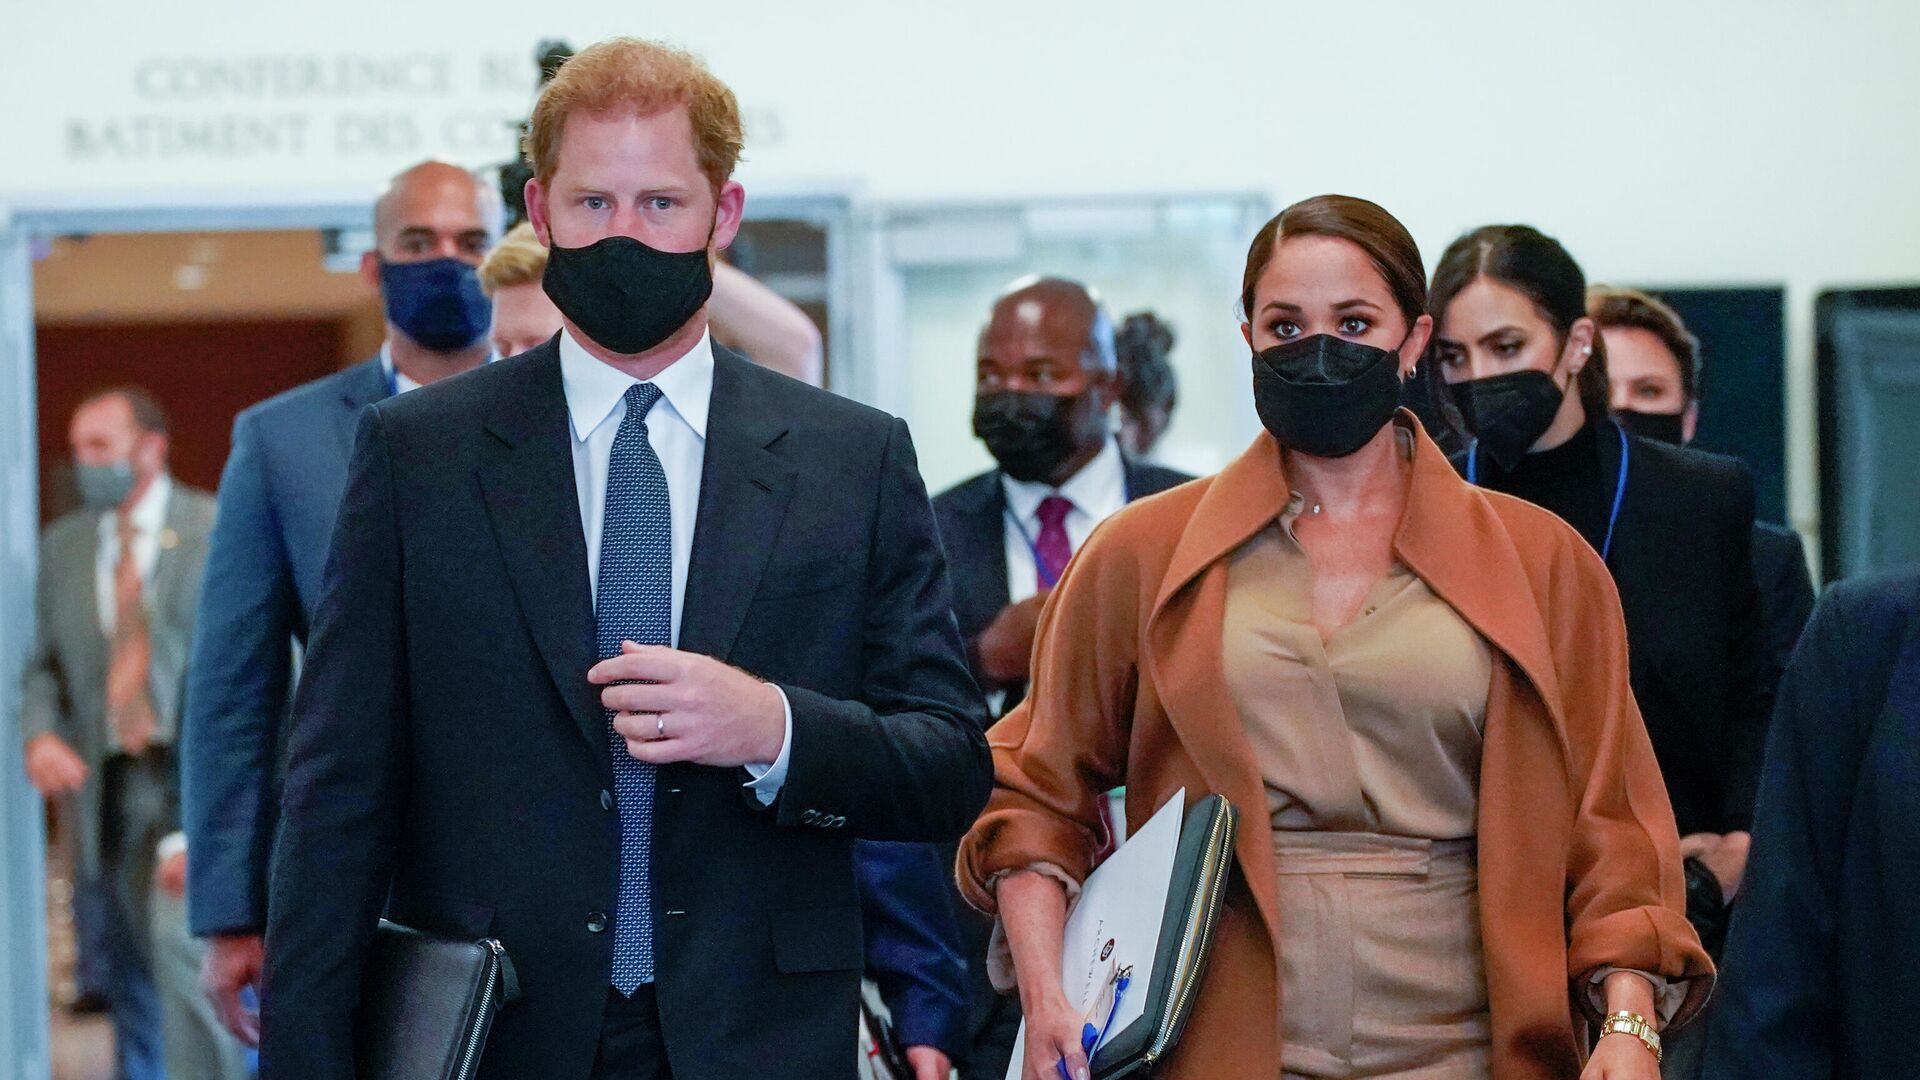 Prince Harry and Meghan, the Duke and Duchess of Sussex are escorted as they leave the United Nations headquarters after a visit during 76th session of the United Nations General Assembly, Saturday, Sept. 25, 2021 - Sputnik International, 1920, 06.02.2022